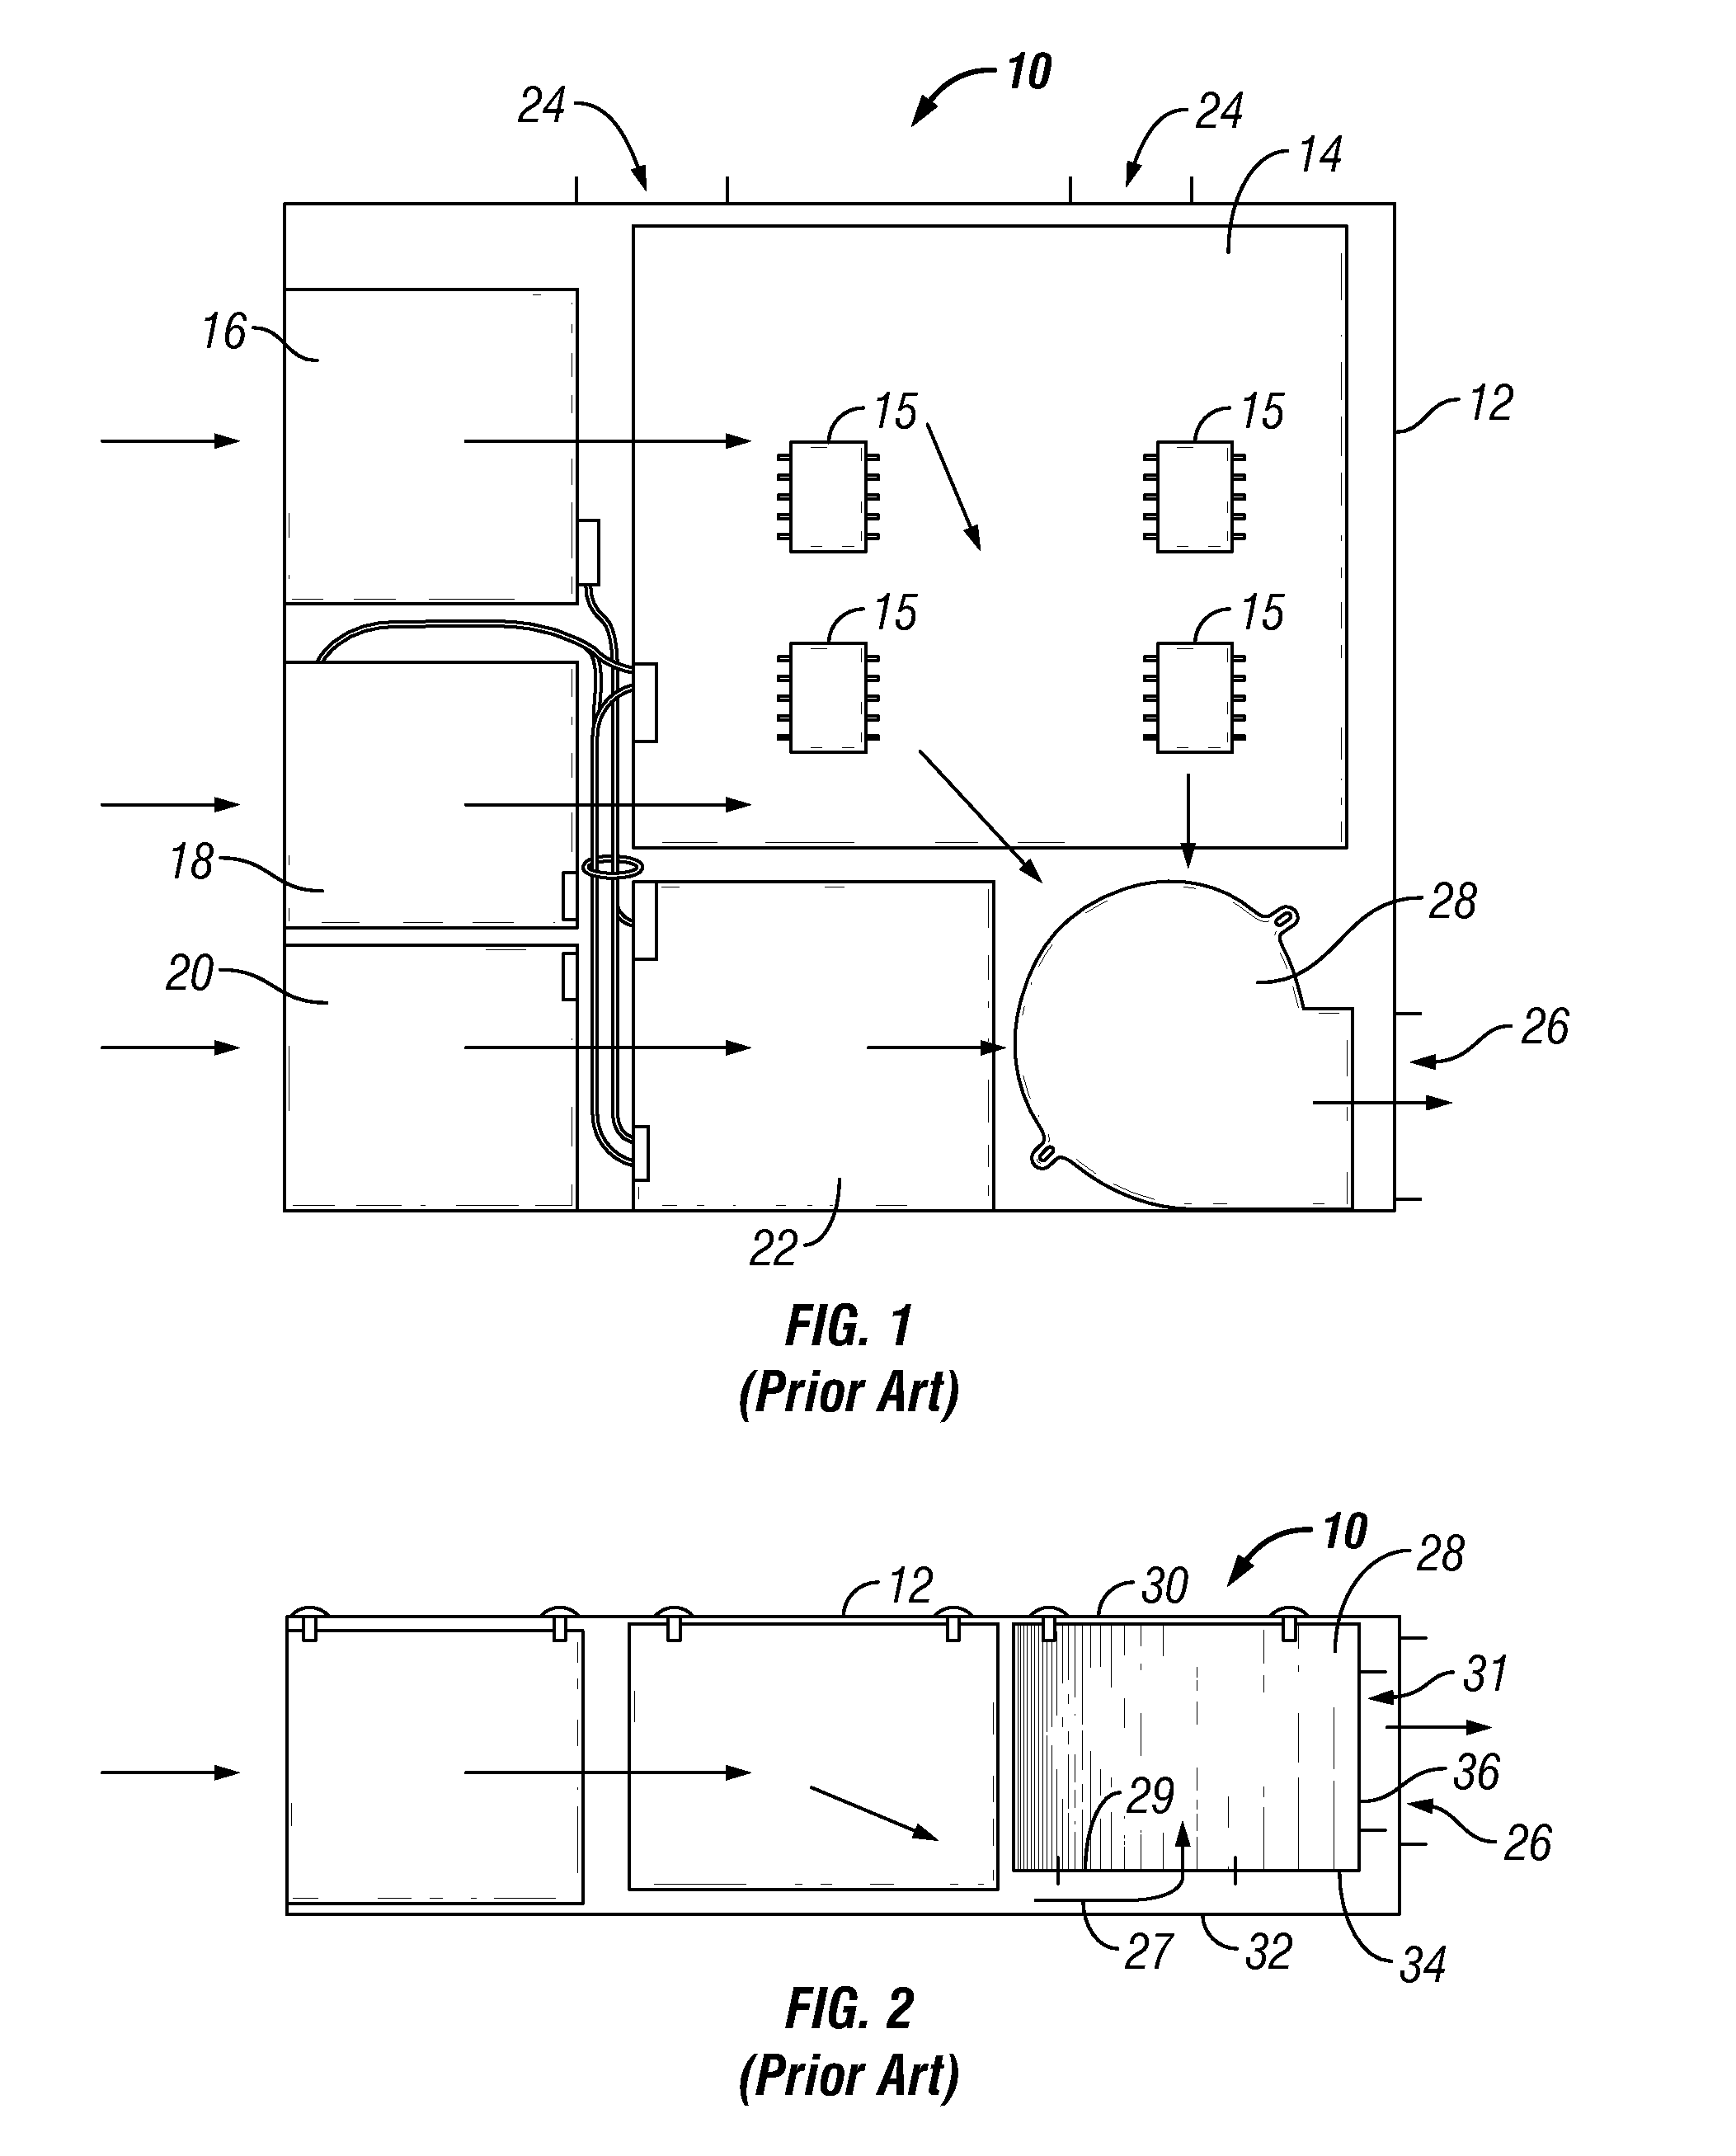 Cooling system with angled blower housing and centrifugal, frusto-conical impeller